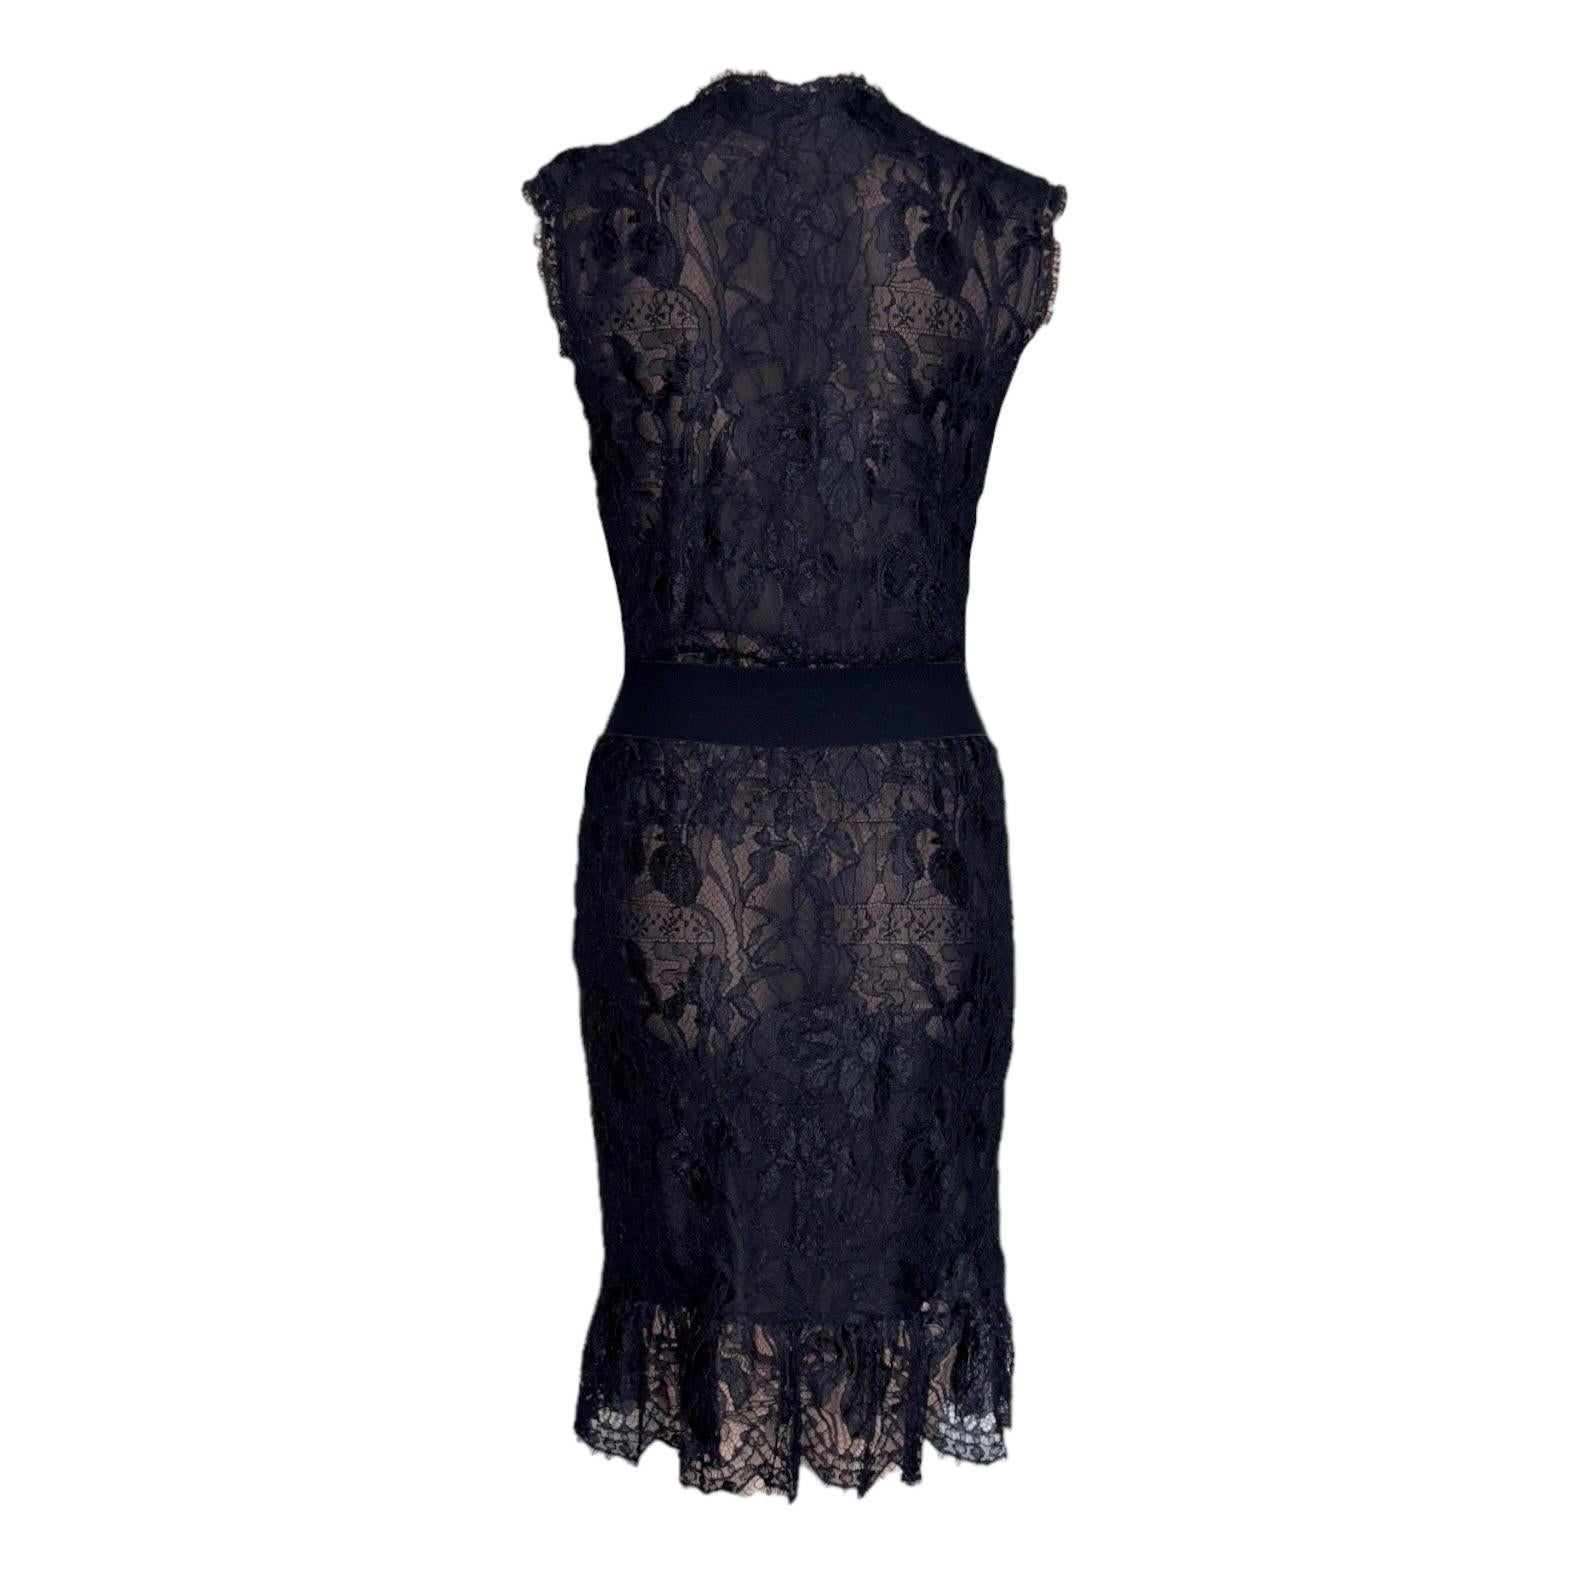 UNWORN Emilio Pucci by Peter Dundas Black Belted Lace Dress Zipper Detail 42 In New Condition For Sale In Switzerland, CH